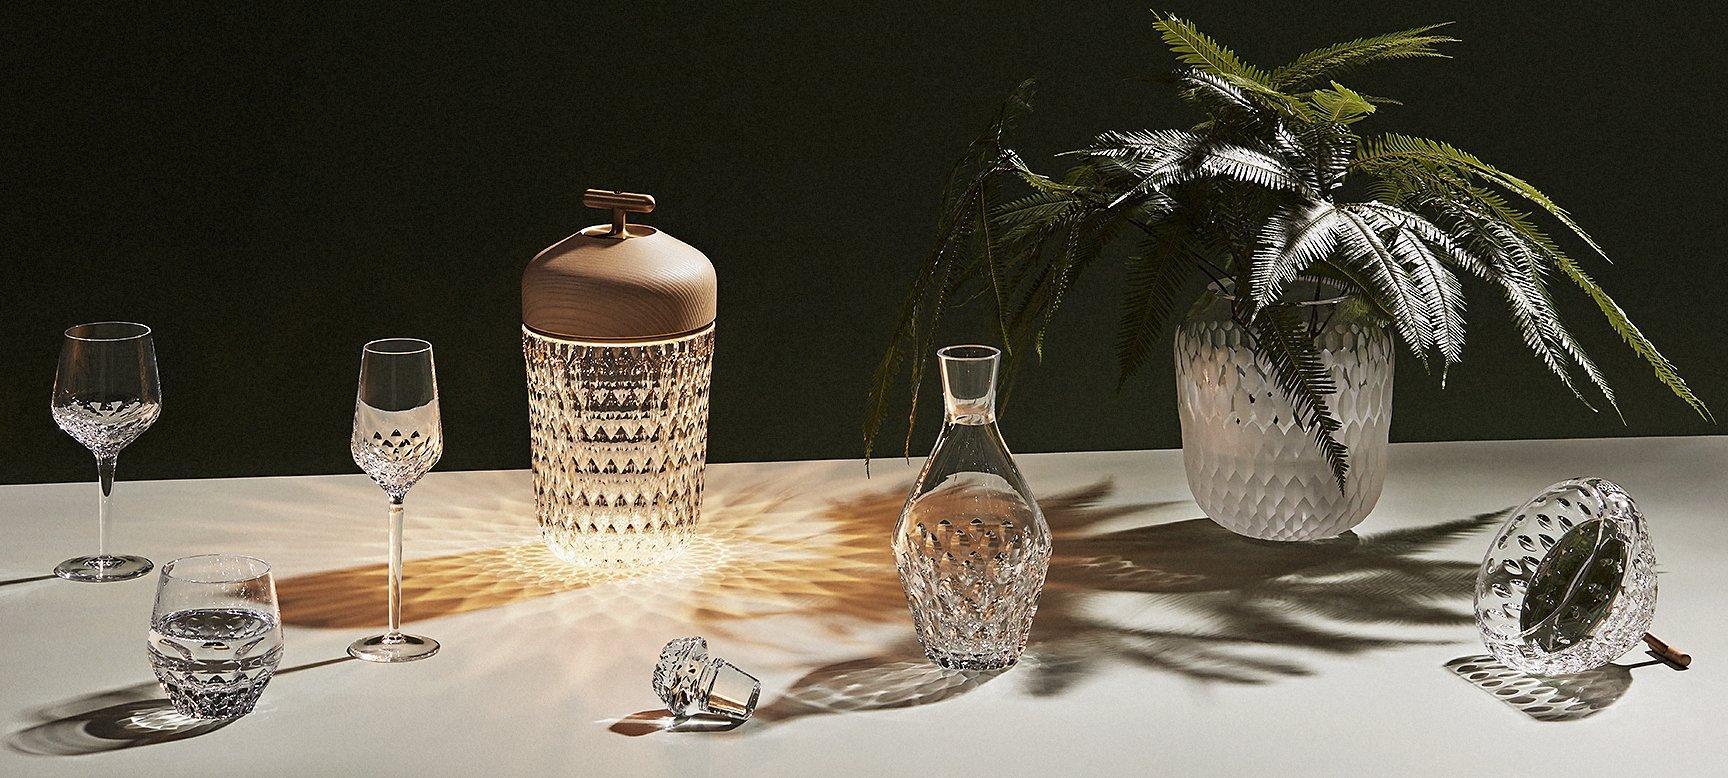 As a table or desk lamp, on a terrace or a boat, the contemporary design of the Folia portable lamp complements all decorative styles. The staggered bevel-cut crystal creates a surprising geometric pattern multiplied by the light, reflecting an